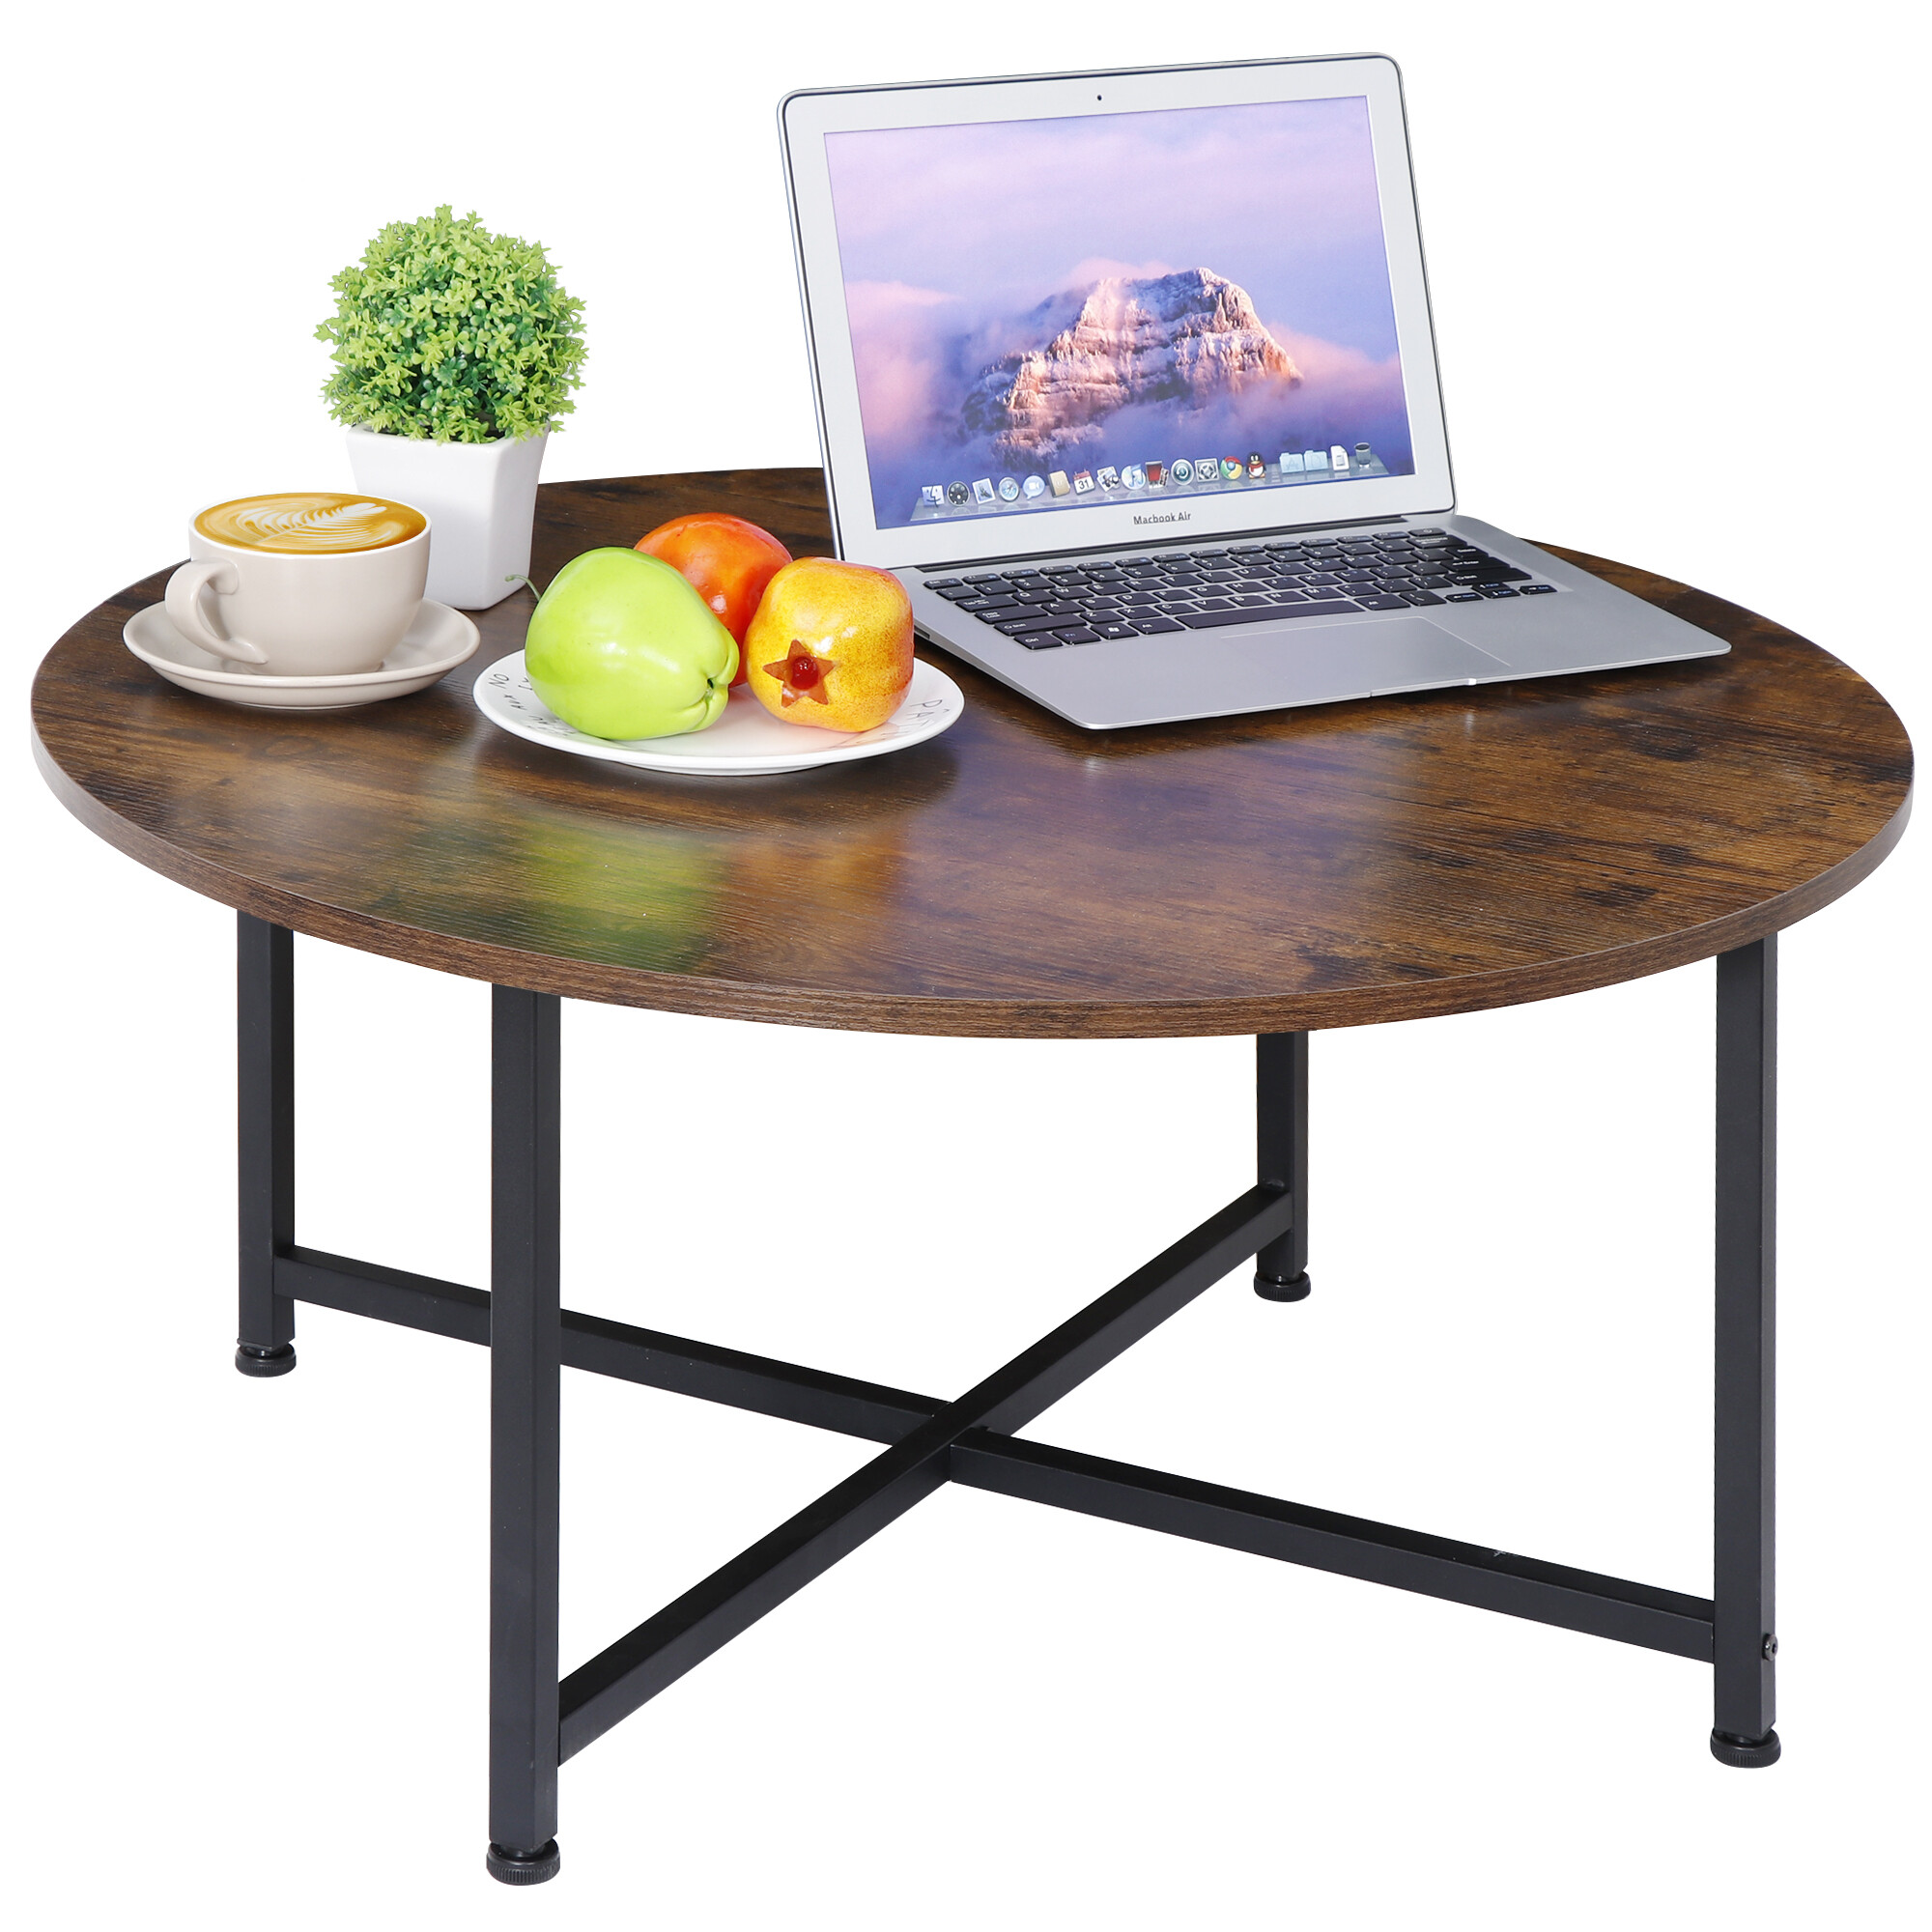 HomGarden 31.5-Inch Industrial Round Coffee Table with X-Base Metal Legs, Sofa Side Table Retro Cocktail Table for Home Office, Living Room, Rustic Brown - image 2 of 11